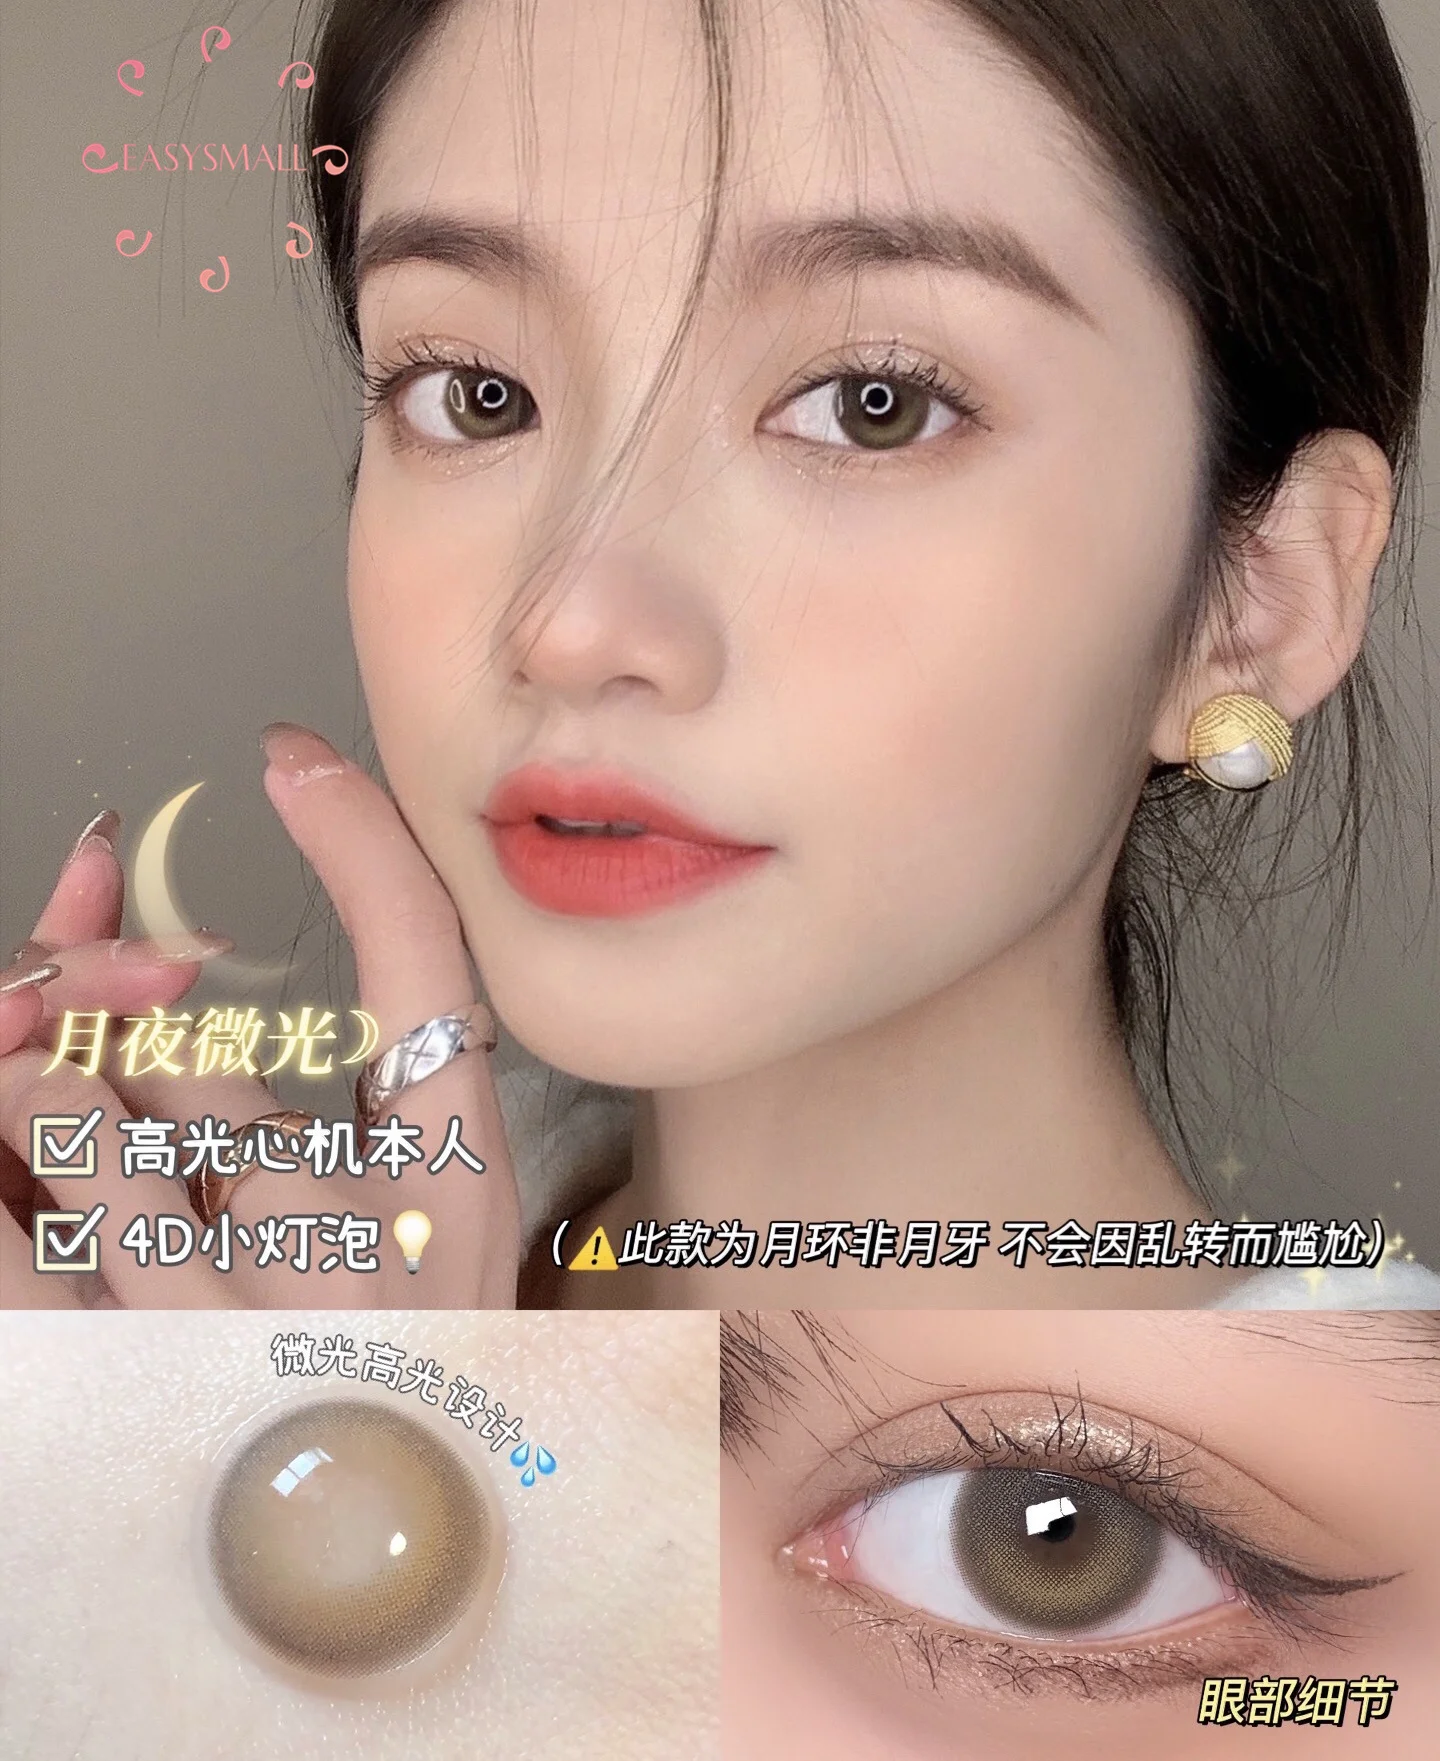 

Easysmall cherry brown power unique Colored Contact Lenses for Eyes contact lens Eye Color big Beautiful Pupil 2pcs/pair